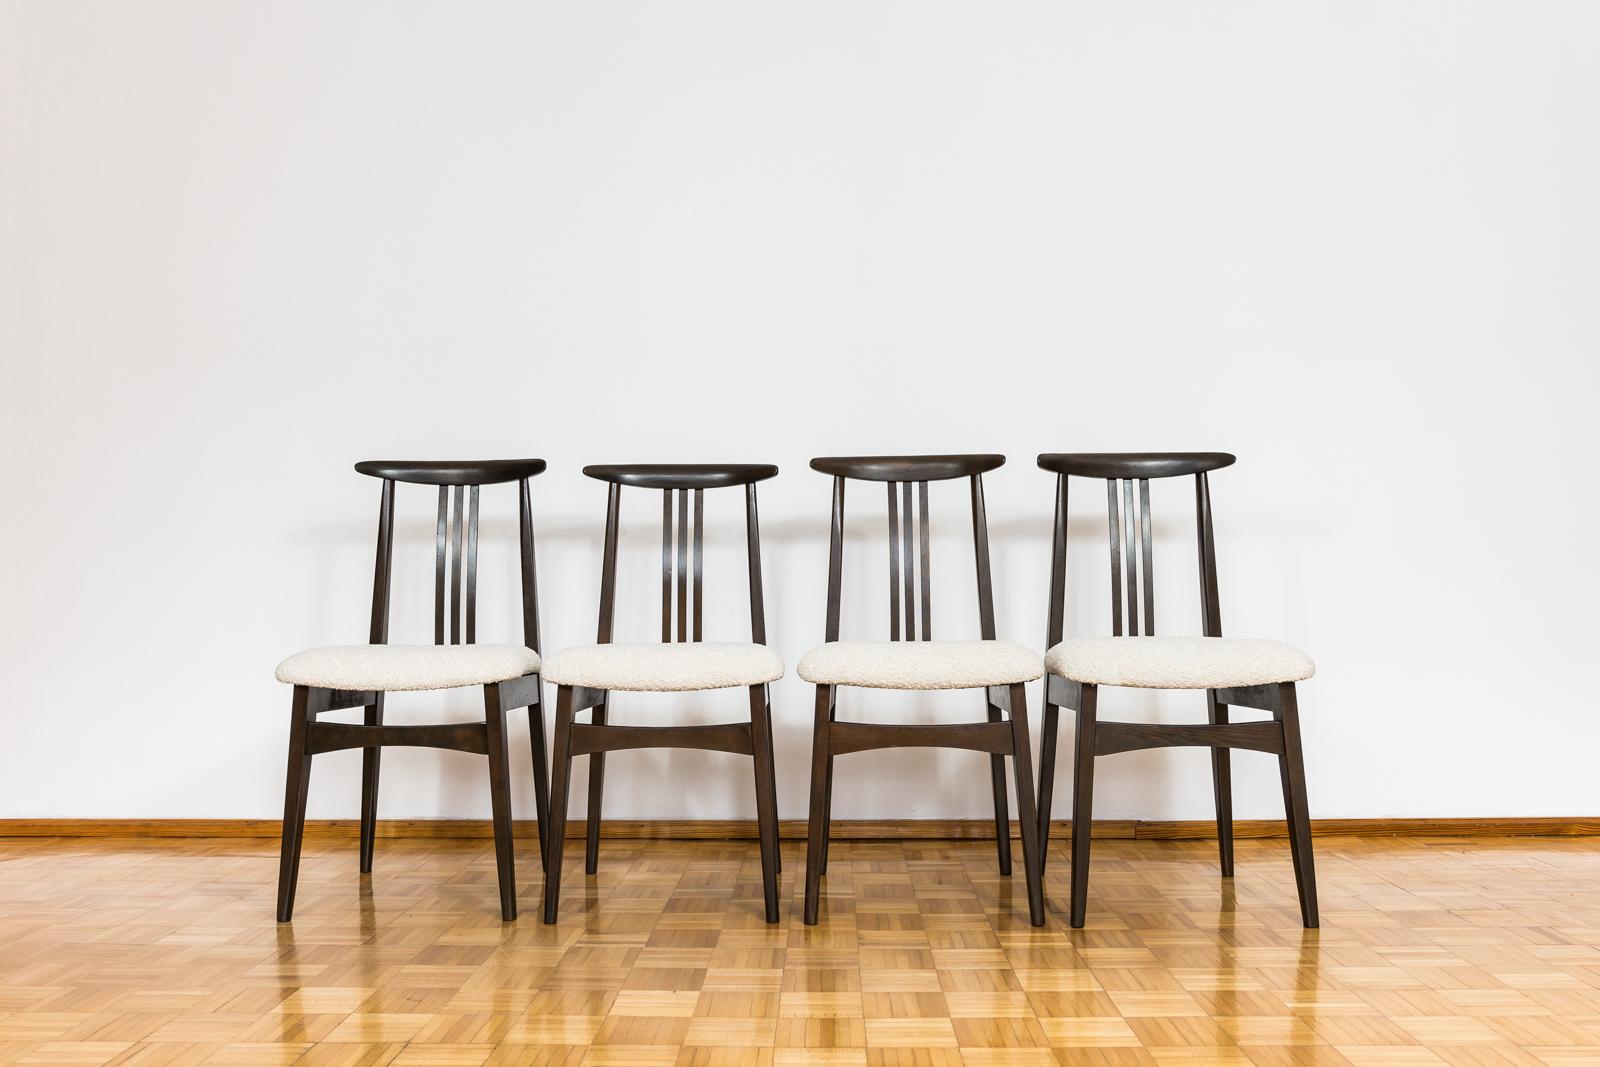 Set of 4 dining chairs designed by M. Zieliński 1960's. Poland.
Reupholstered chairs in beige boucle type of fabric, wood have been completely restored and refinished.